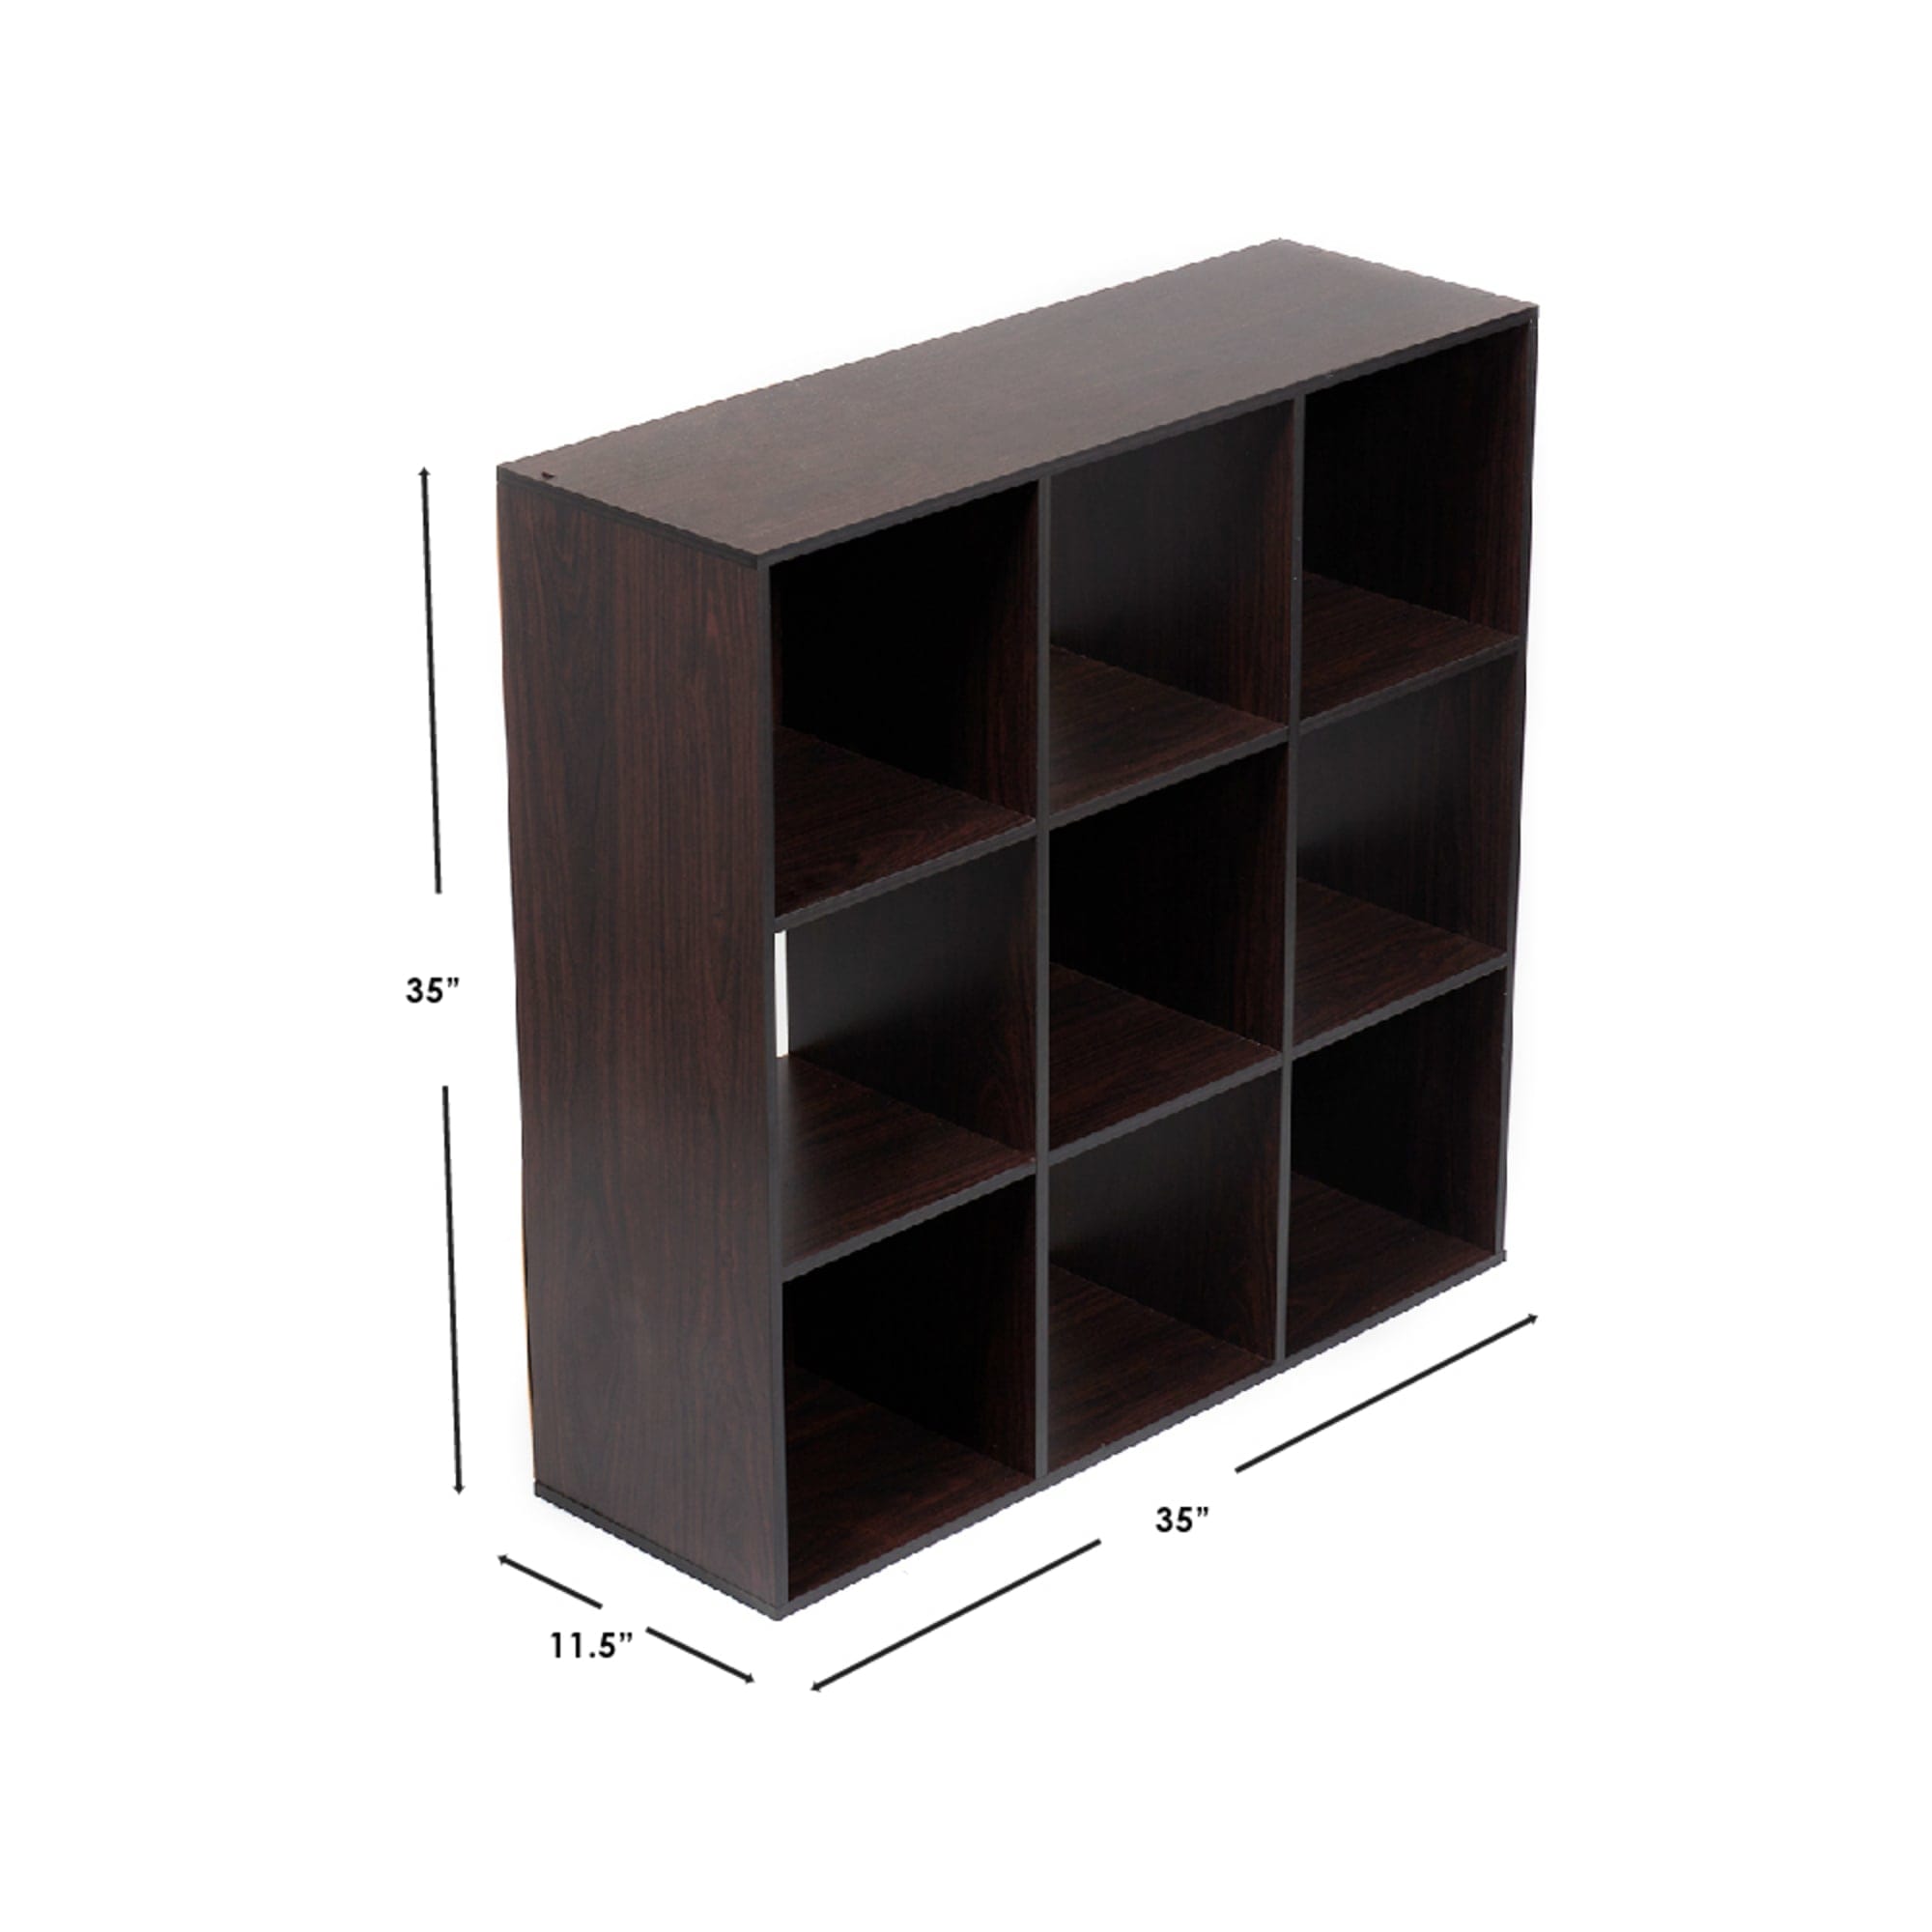 Home Basics Open and Enclosed 9 Cube MDF Storage Organizer, Espresso $50.00 EACH, CASE PACK OF 1